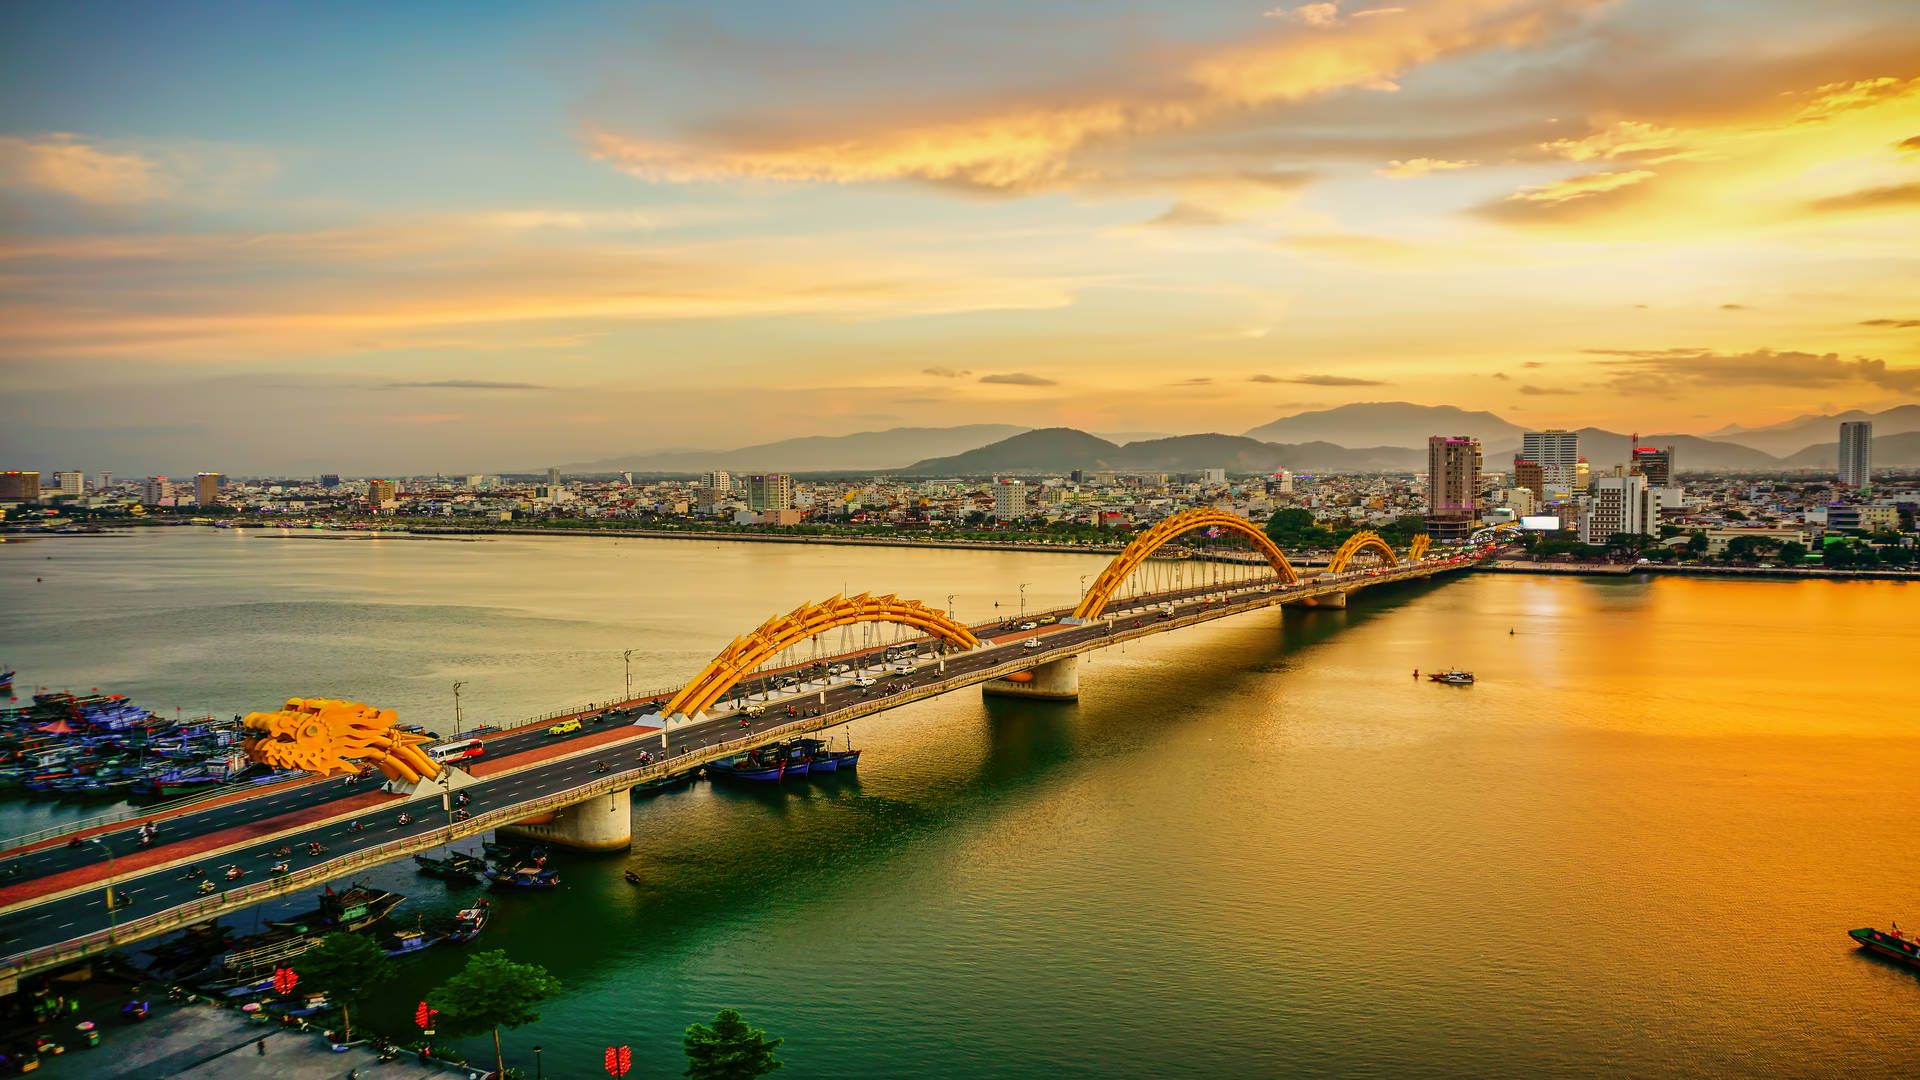 The most Instagrammable spots in Da Nang